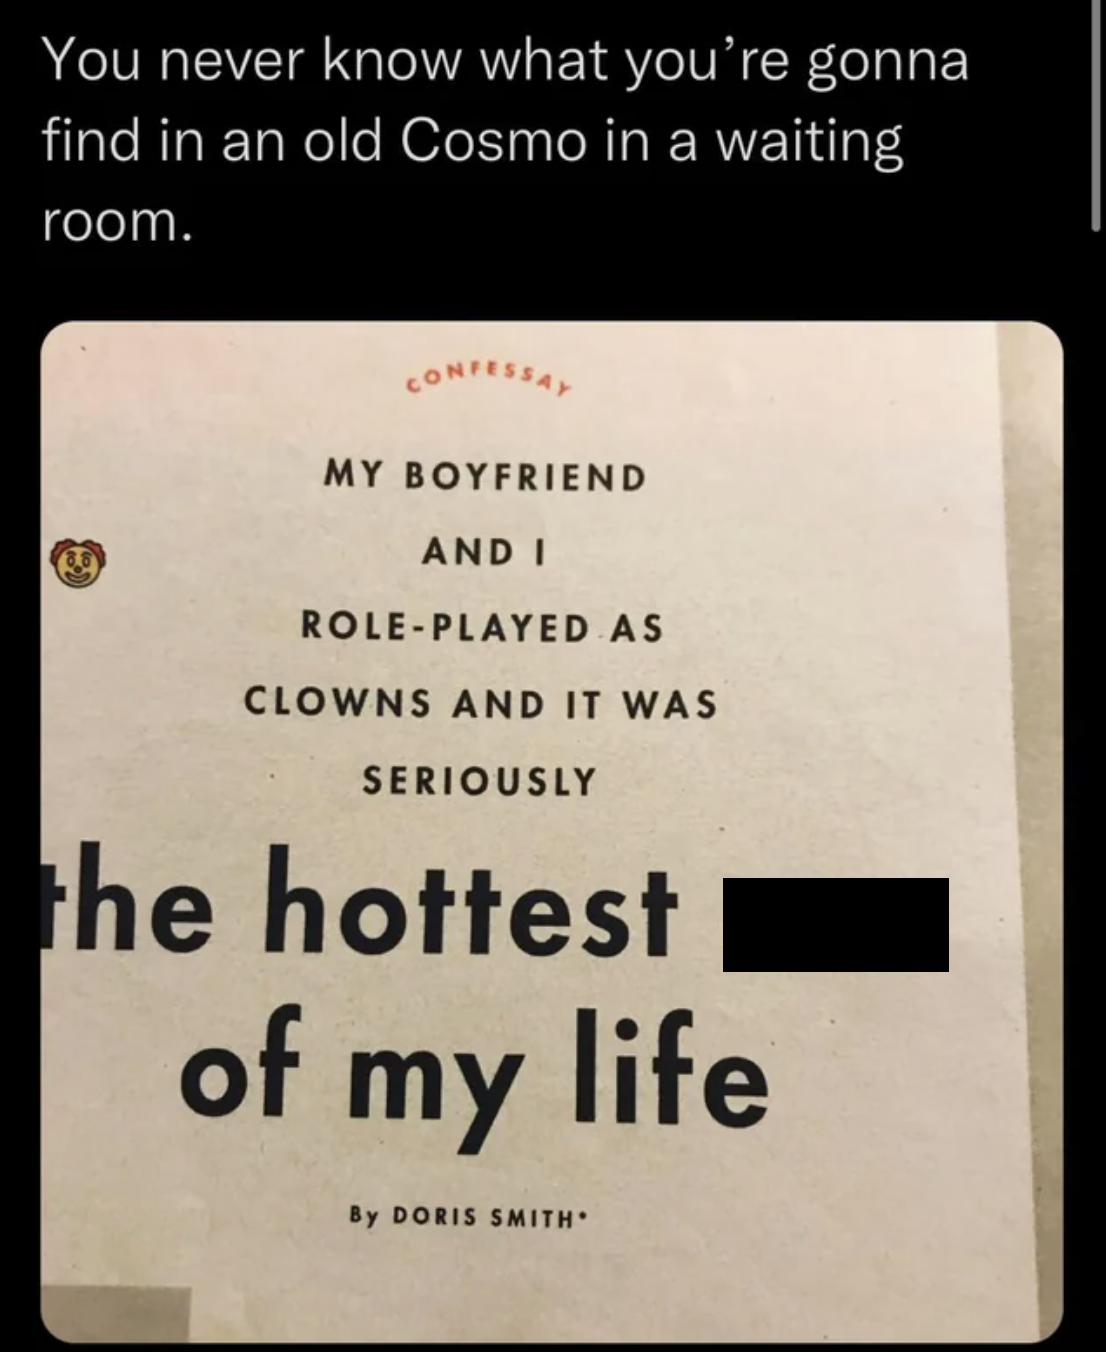 screenshot - You never know what you're gonna find in an old Cosmo in a waiting room. Confessay My Boyfriend And I RolePlayed As Clowns And It Was Seriously the hottest of my life By Doris Smith